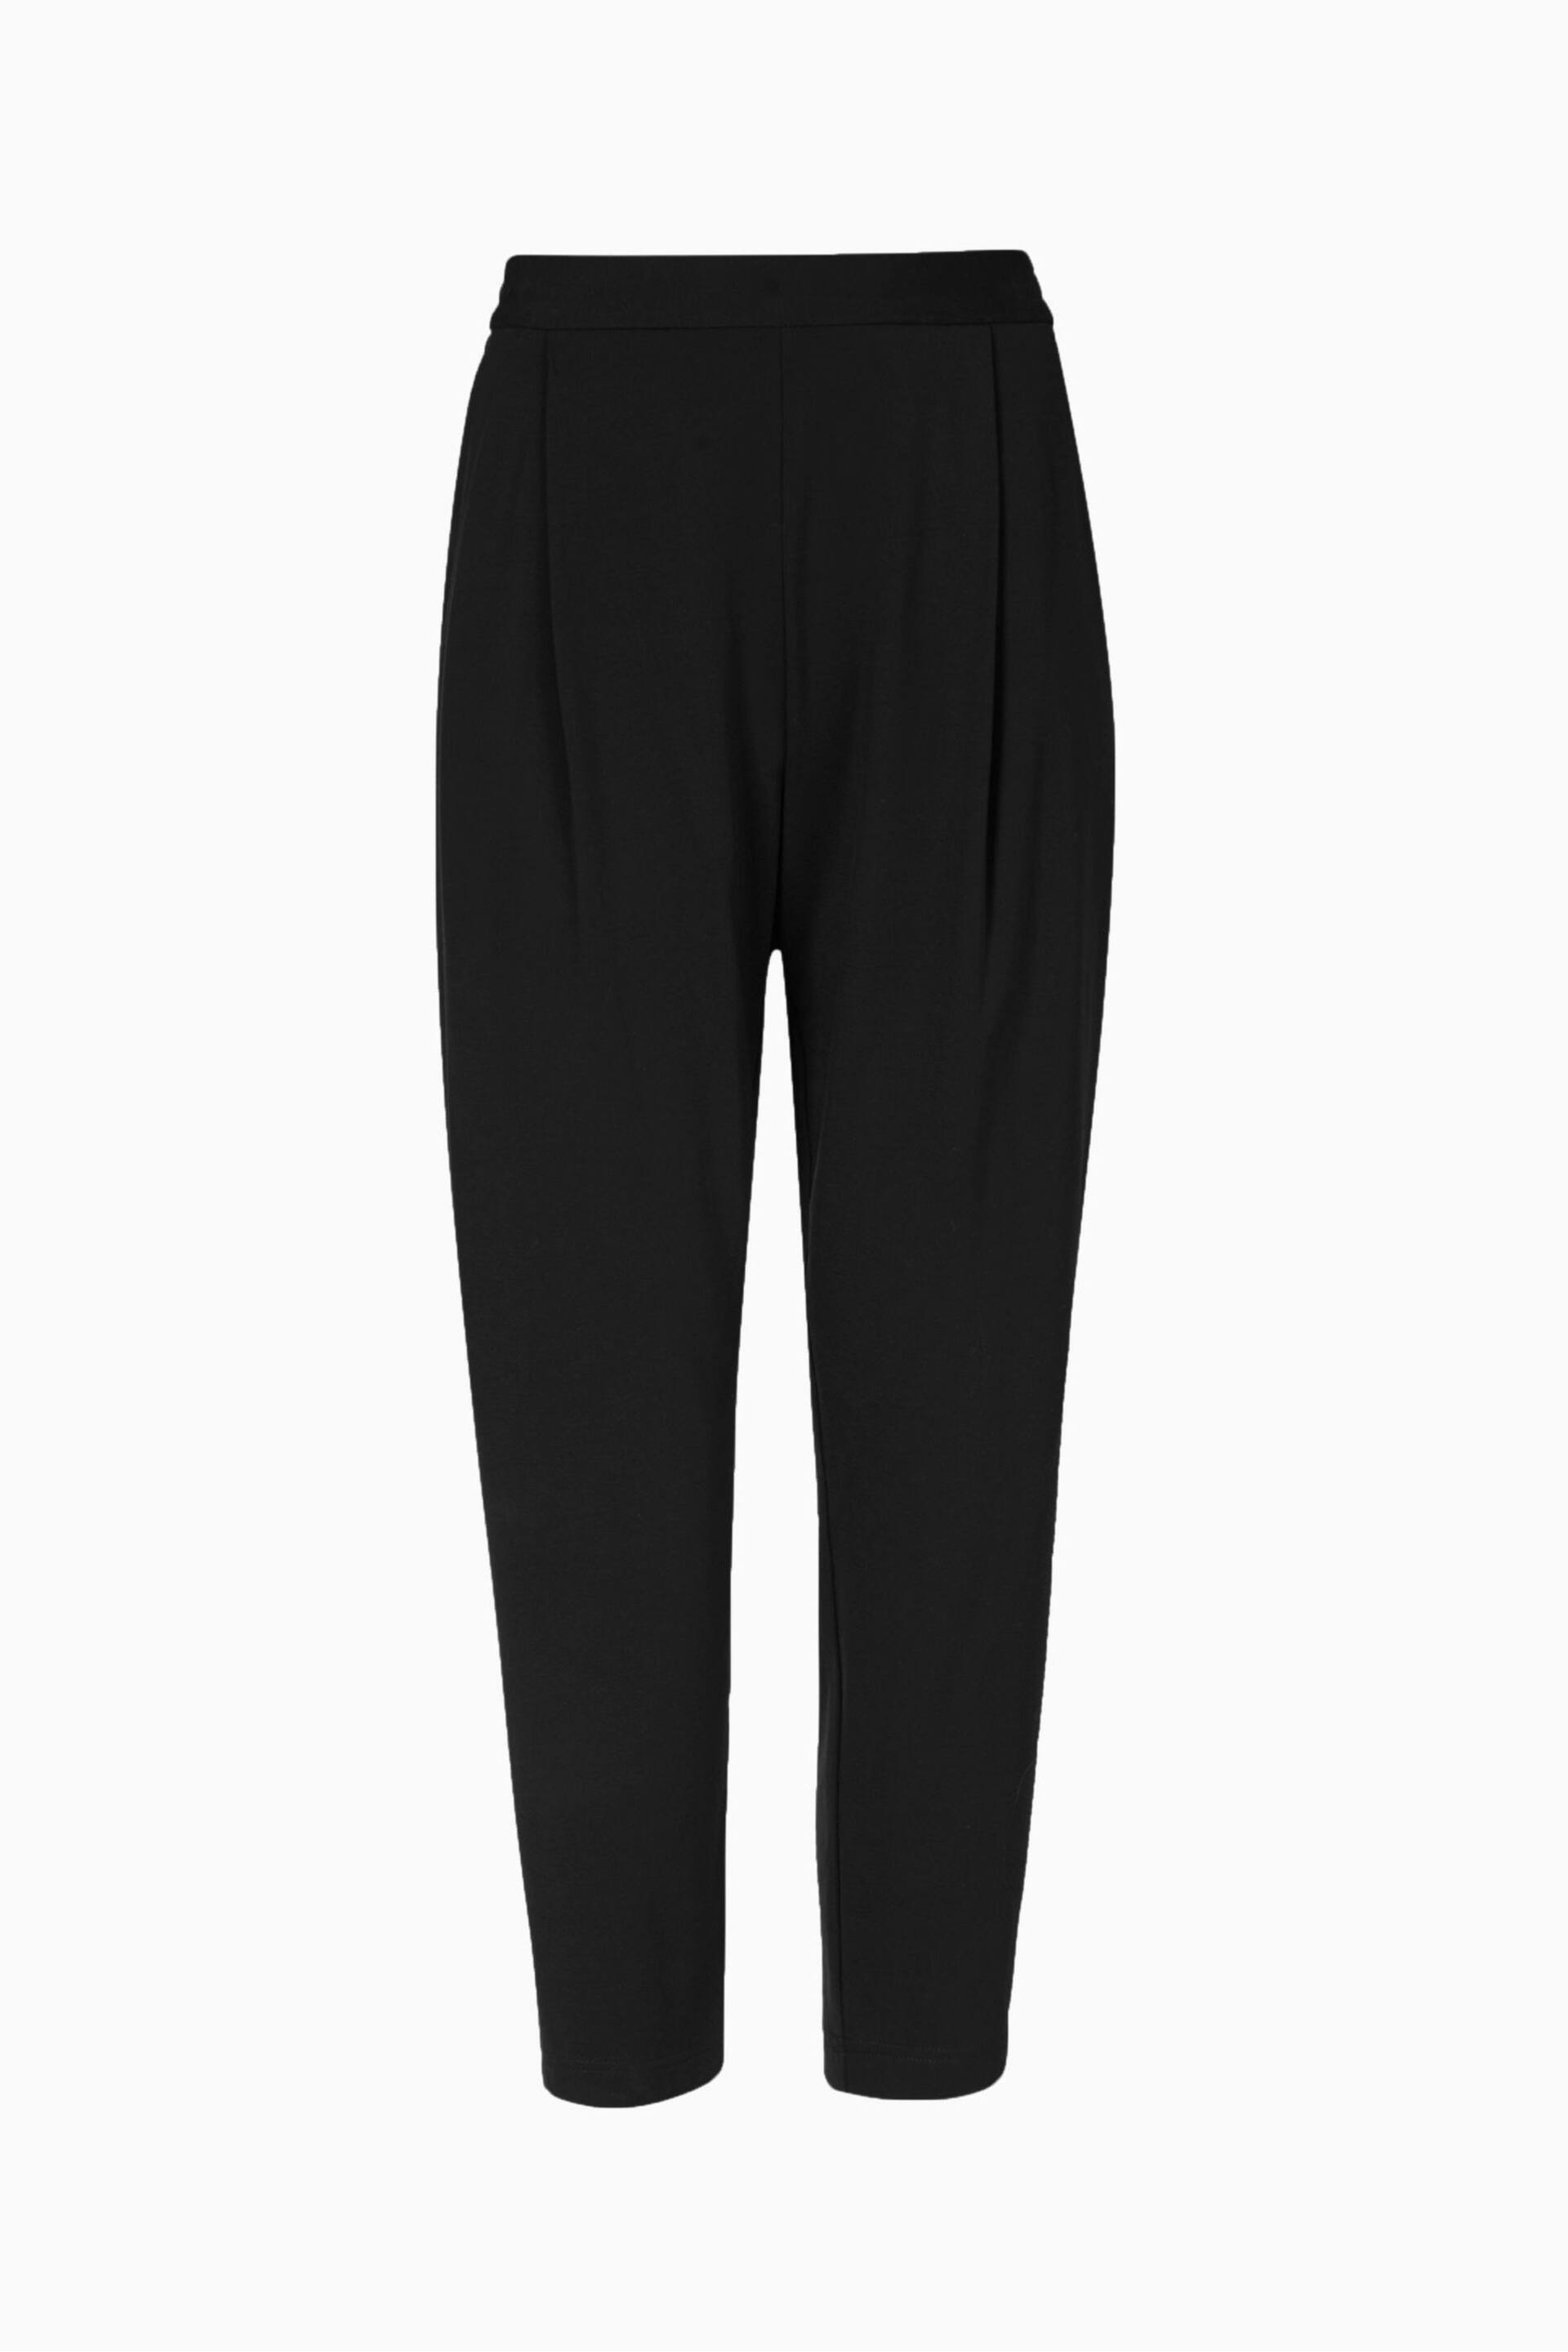 AllSaints Black Aleida Jersey Trousers - Image 4 of 6